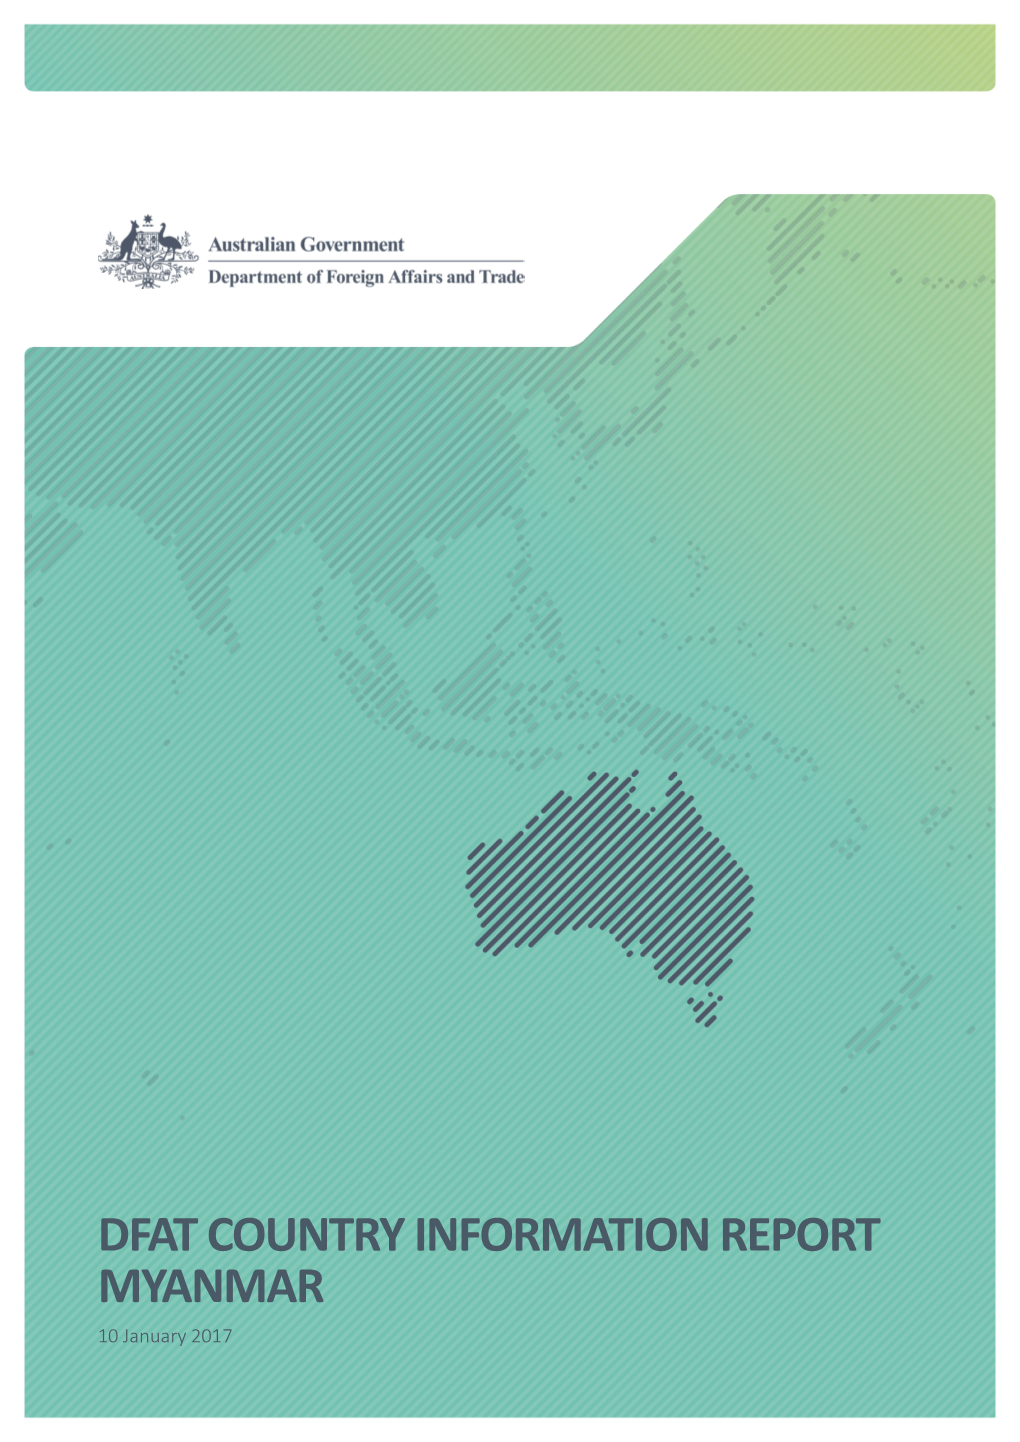 DFAT COUNTRY INFORMATION REPORT MYANMAR 10 January 2017